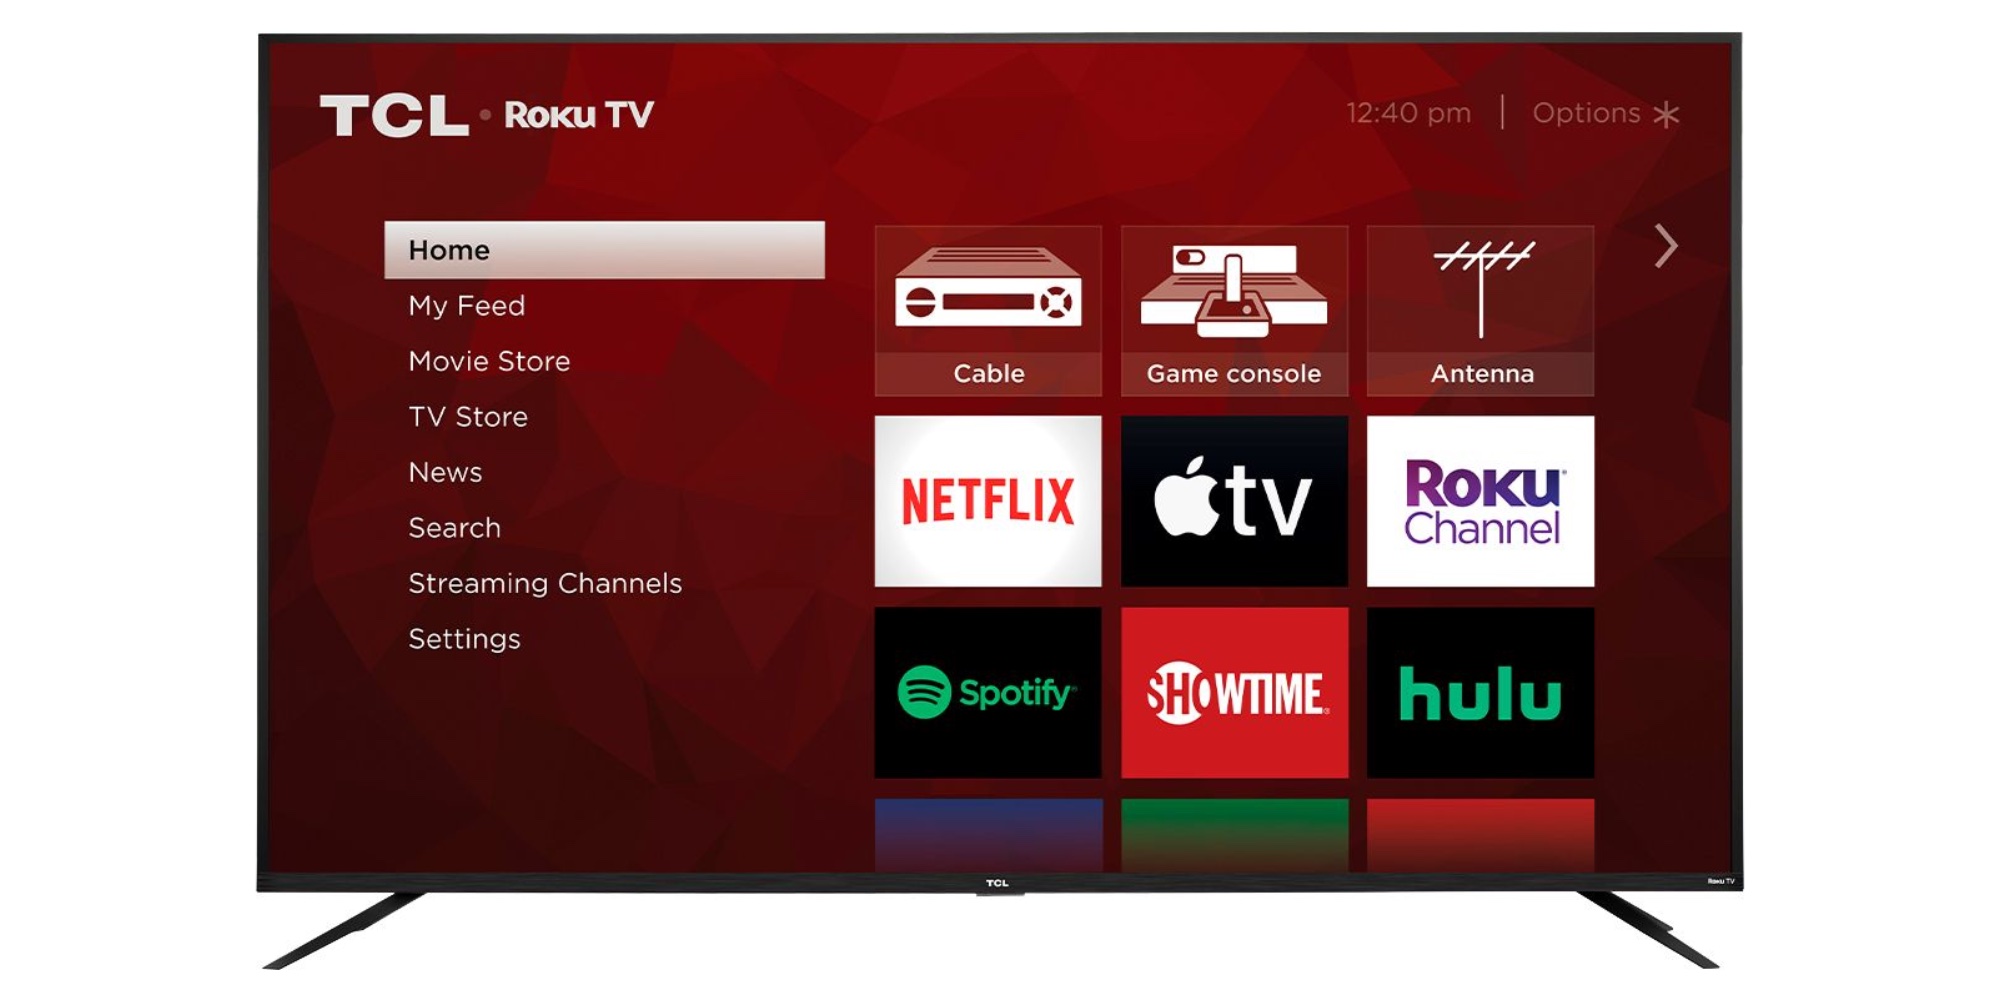 Upgrade to a 75-inch TCL 4K Roku Smart TV for just $543 (Save 30%) - 9to5Toys